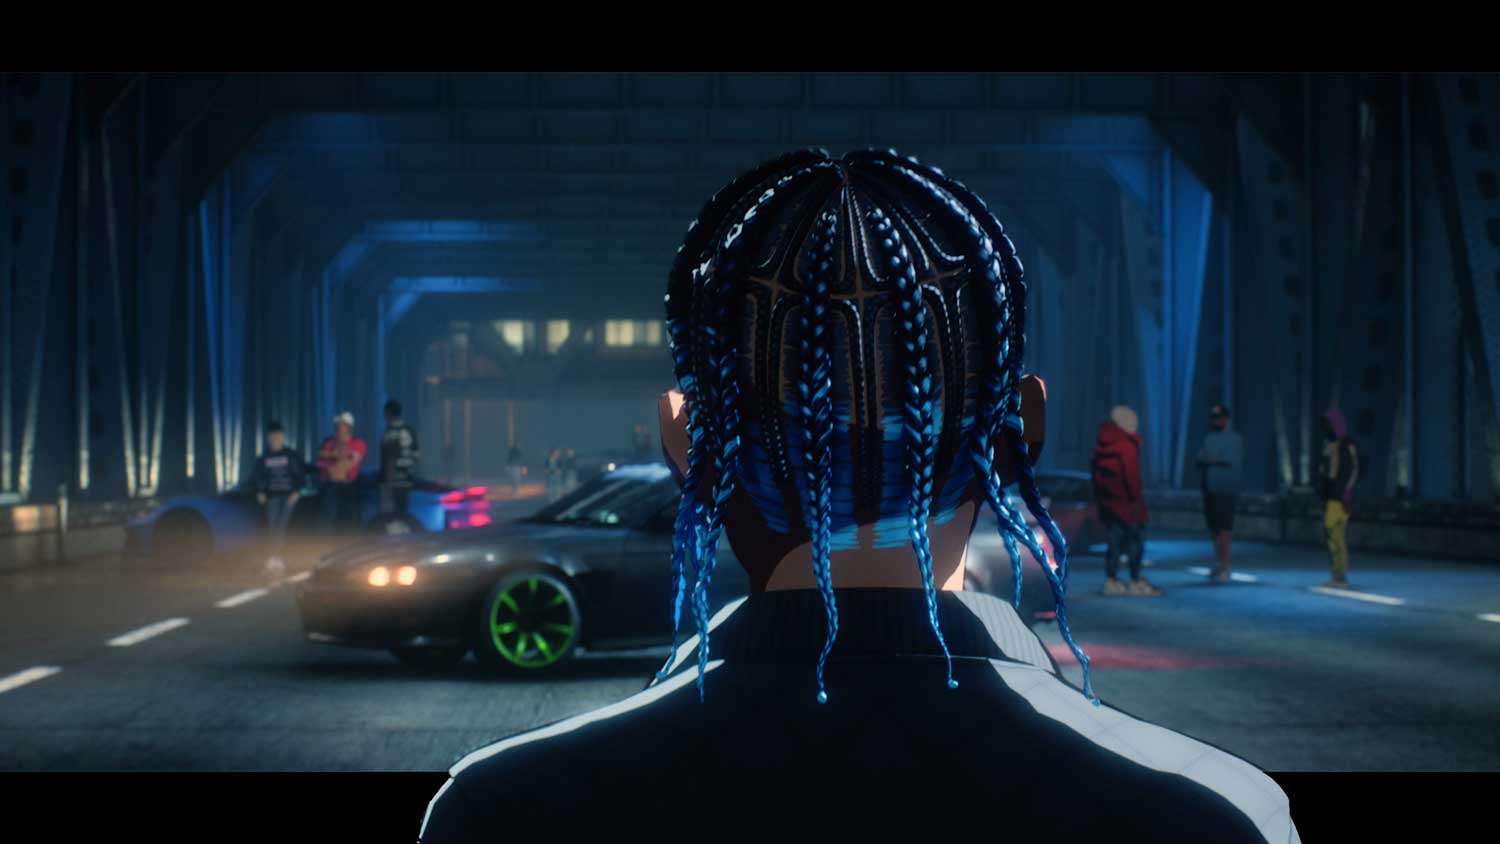 Need-for-Speed-Unbound-Reveal-Trailer-A$AP-Rocky-Mike&Payne-Realtime-UK | STASH MAGAZINE